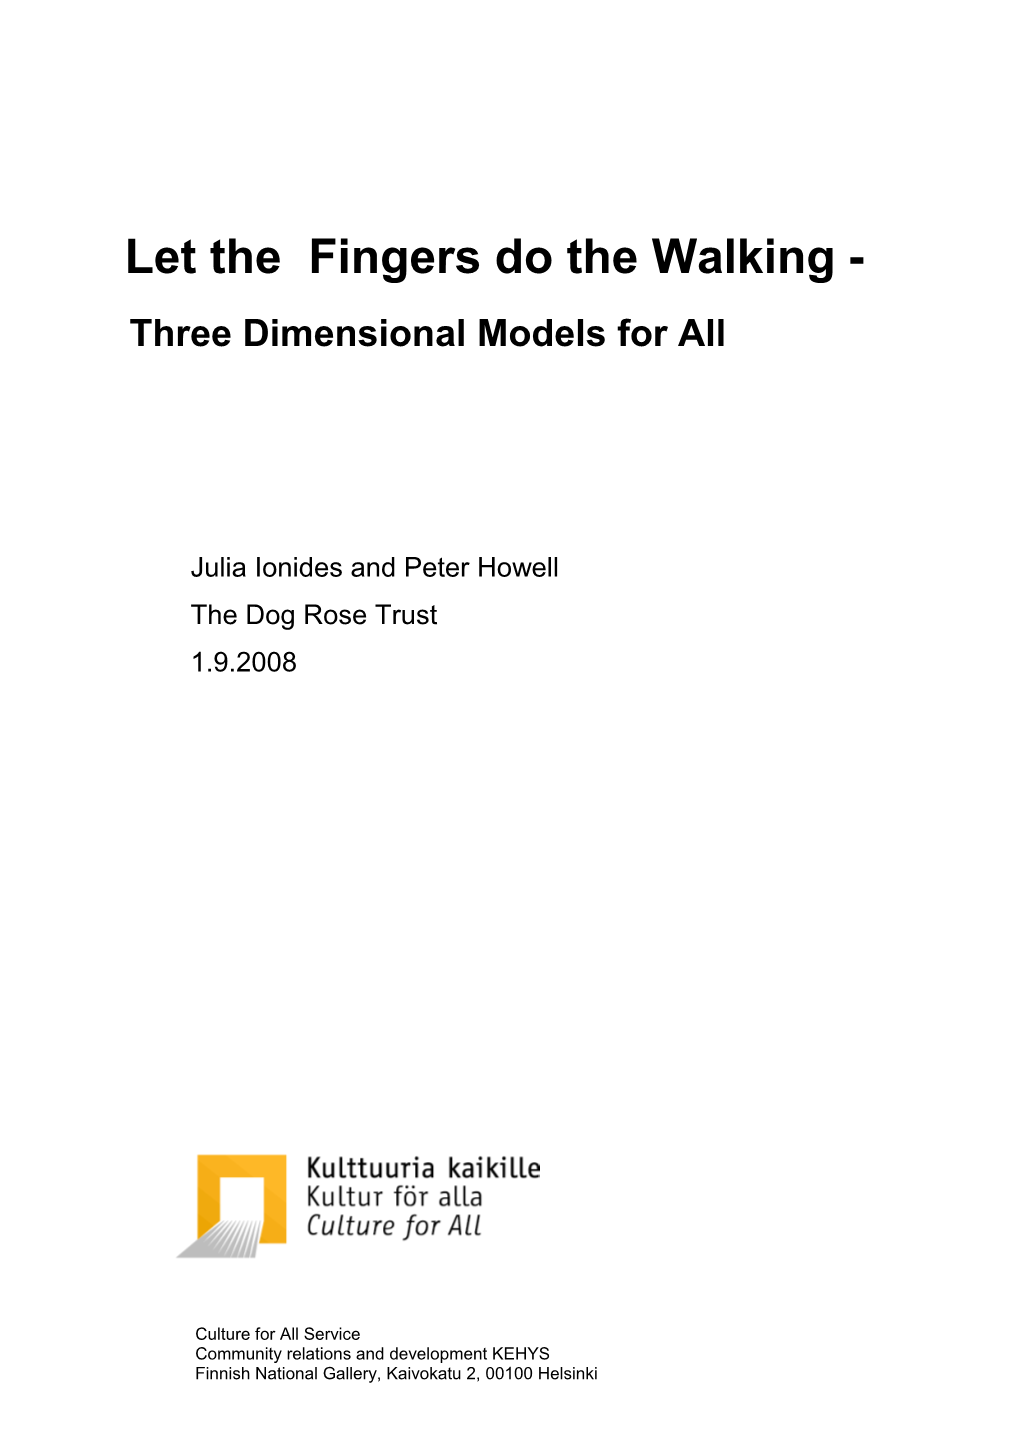 Let the Fingers Do the Walking